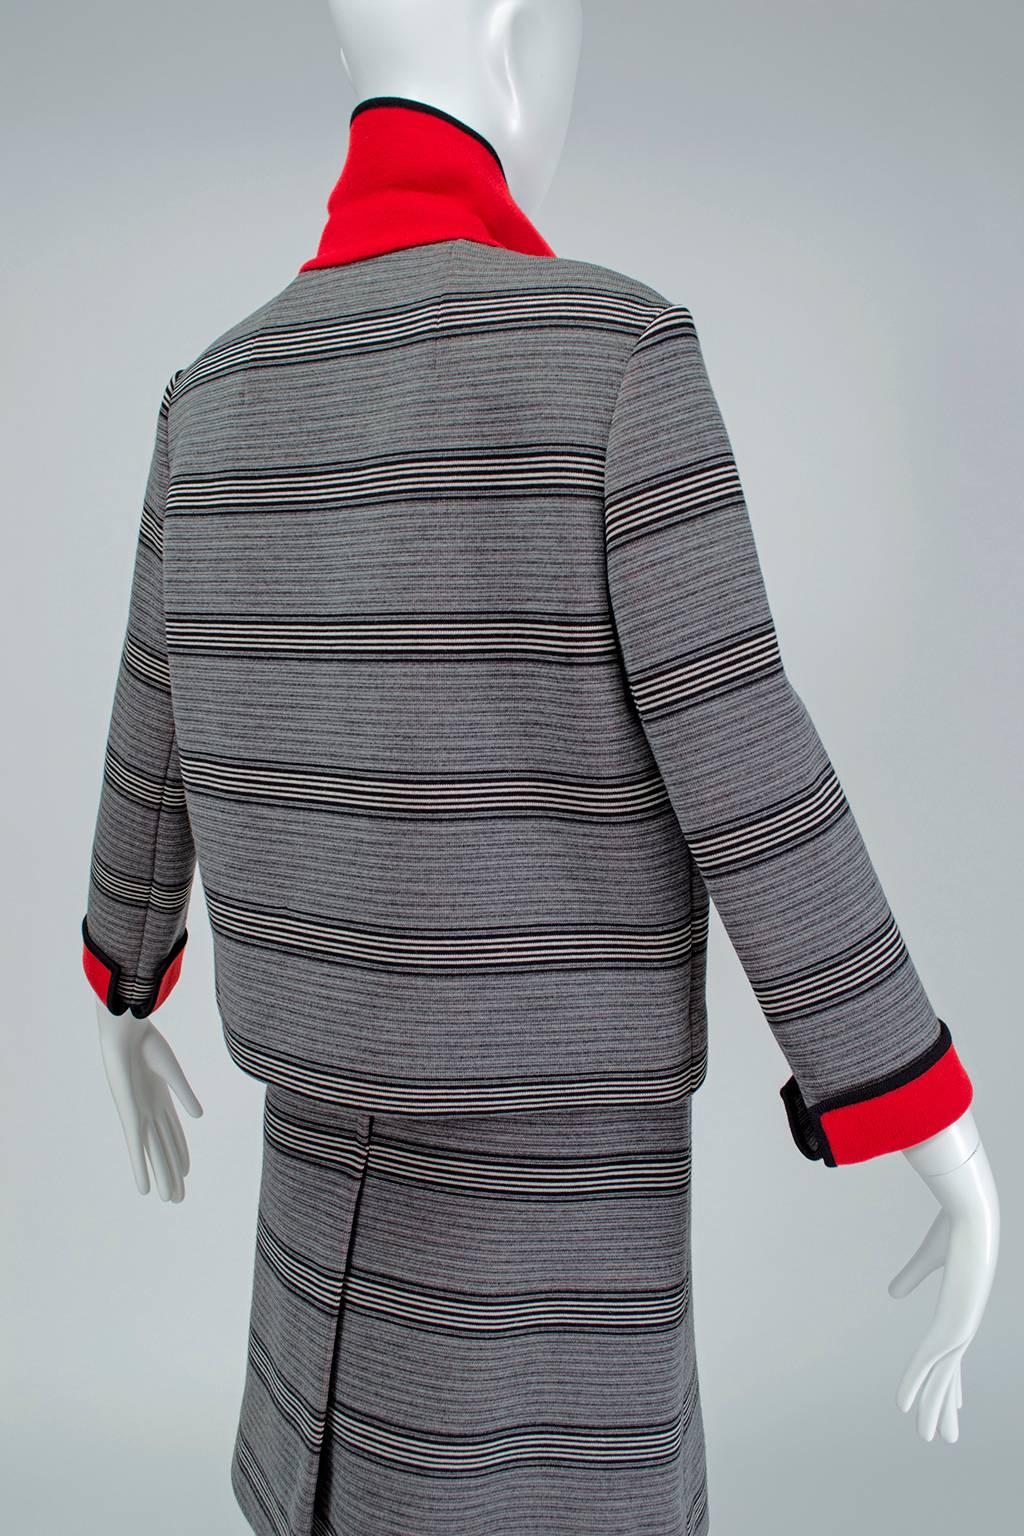 Gray Mod Italian Dolce Vita Black and Red Stripe A-Line Wool Vespa Suit- M, 1960s For Sale